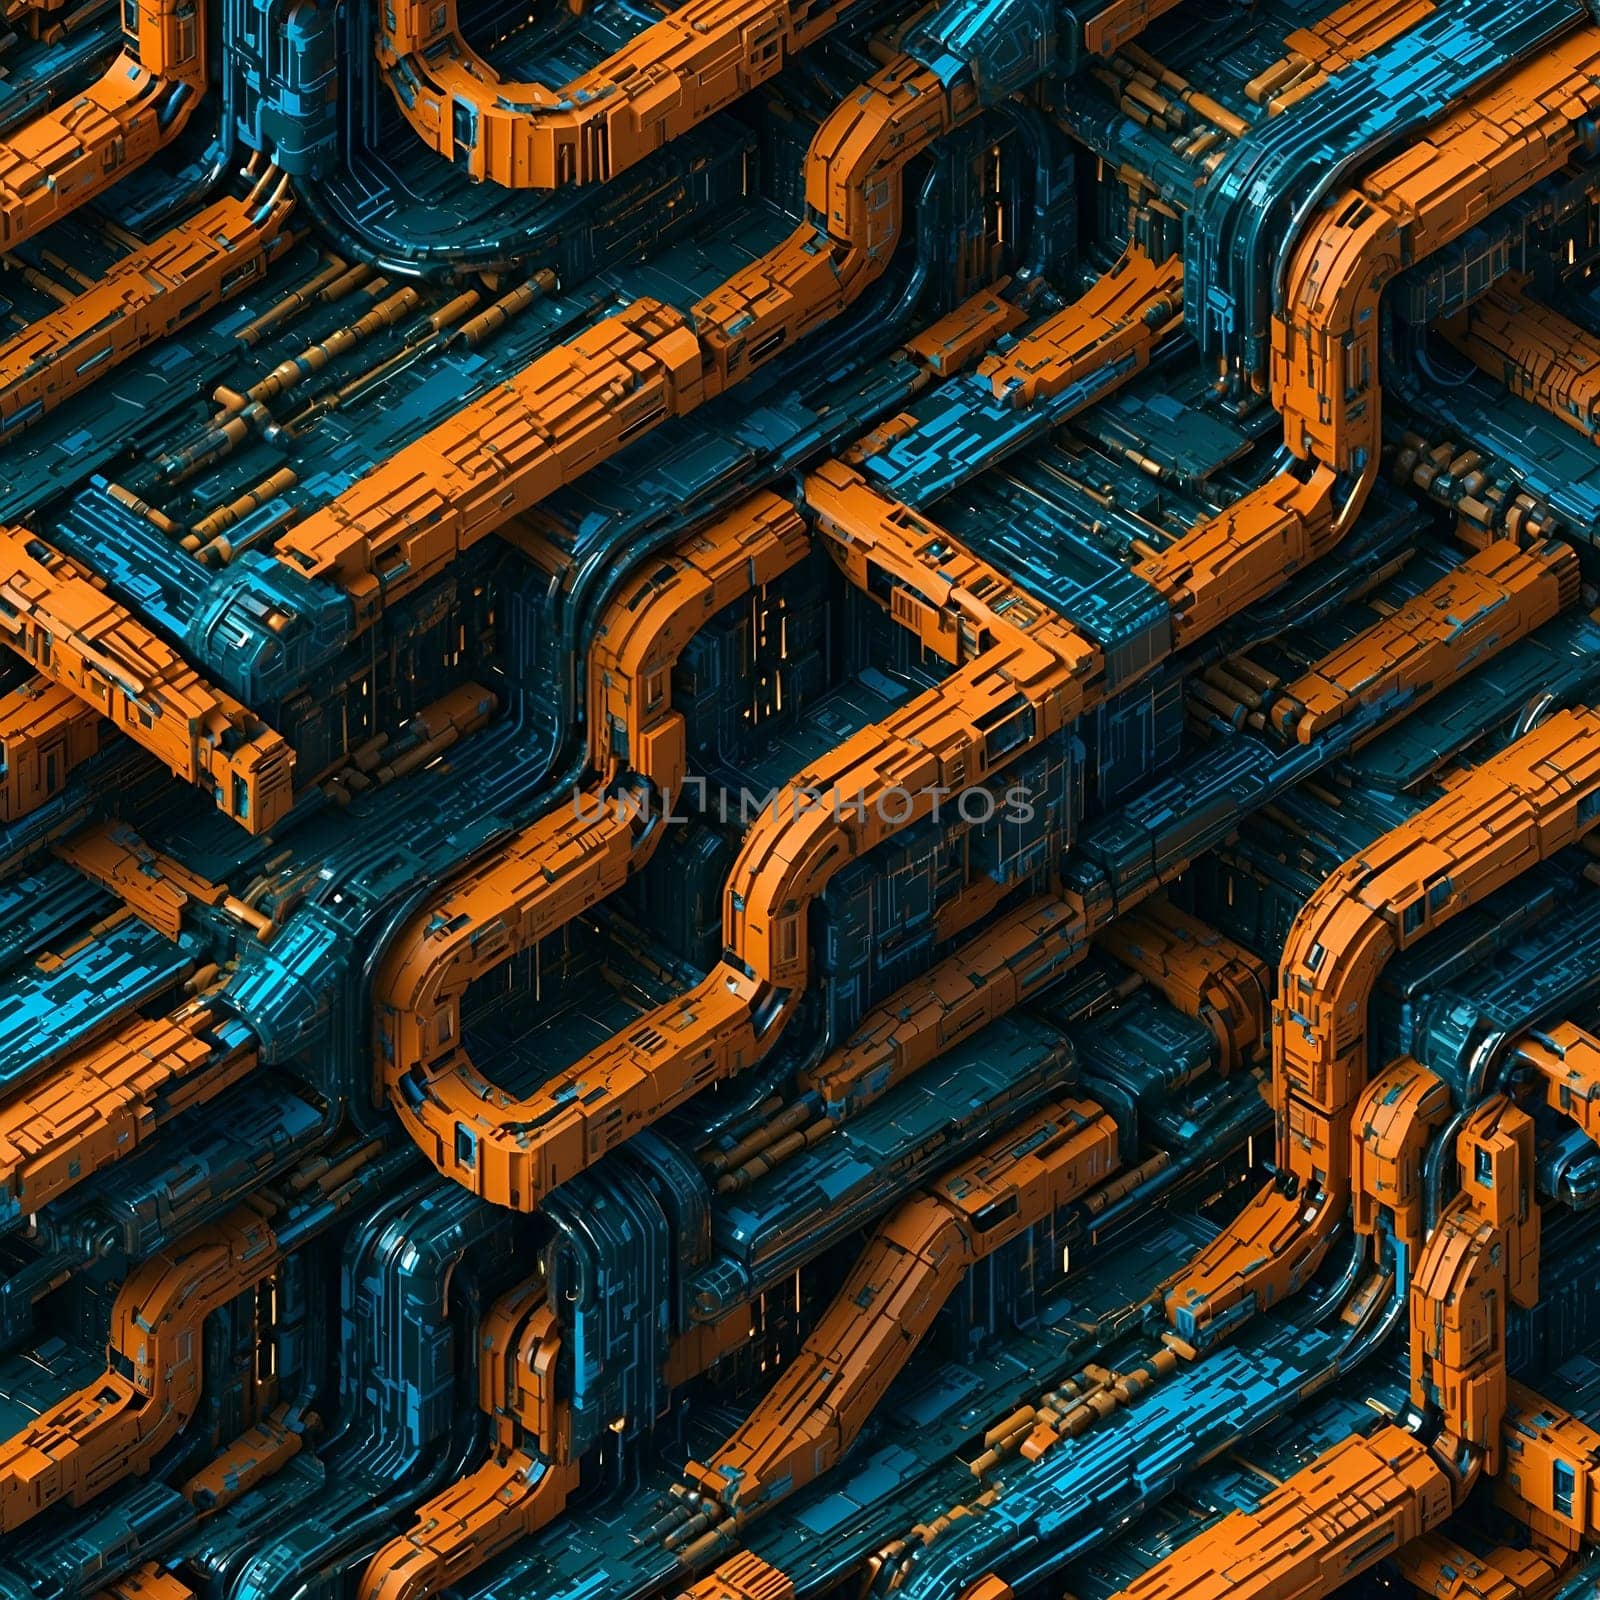 A seamless pattern featuring a plentiful assortment of orange and blue pipes.